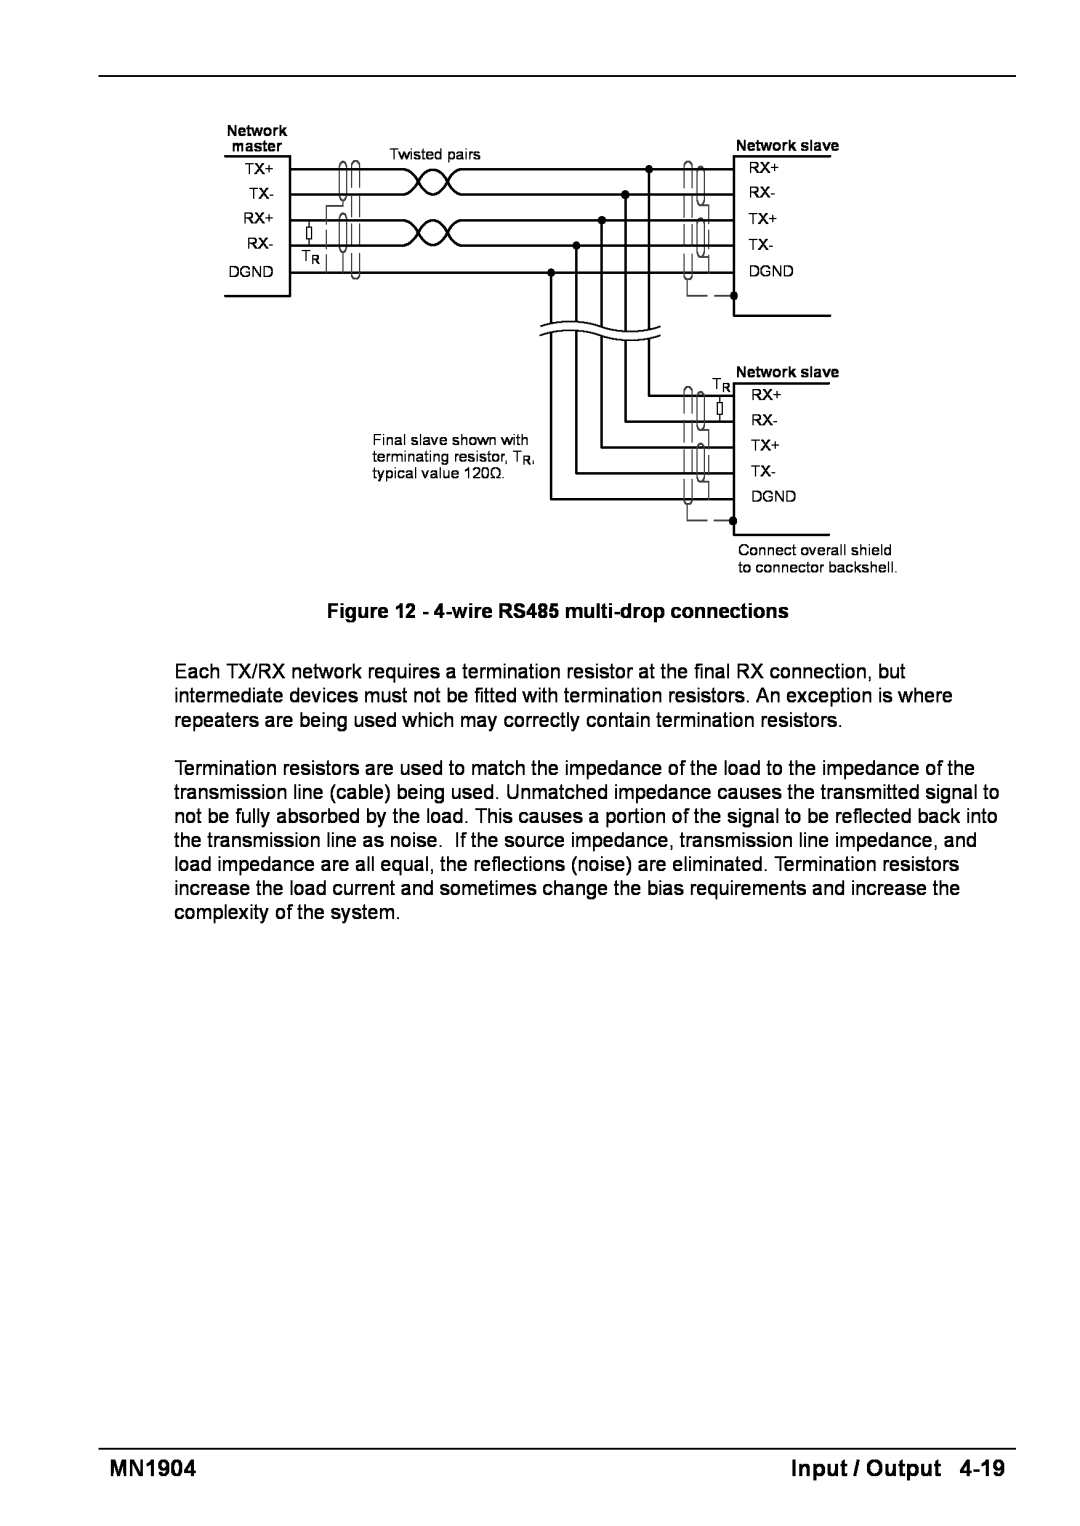 Baldor BXII installation manual 4-wireRS485 multi-dropconnections, Network master, Network slave 